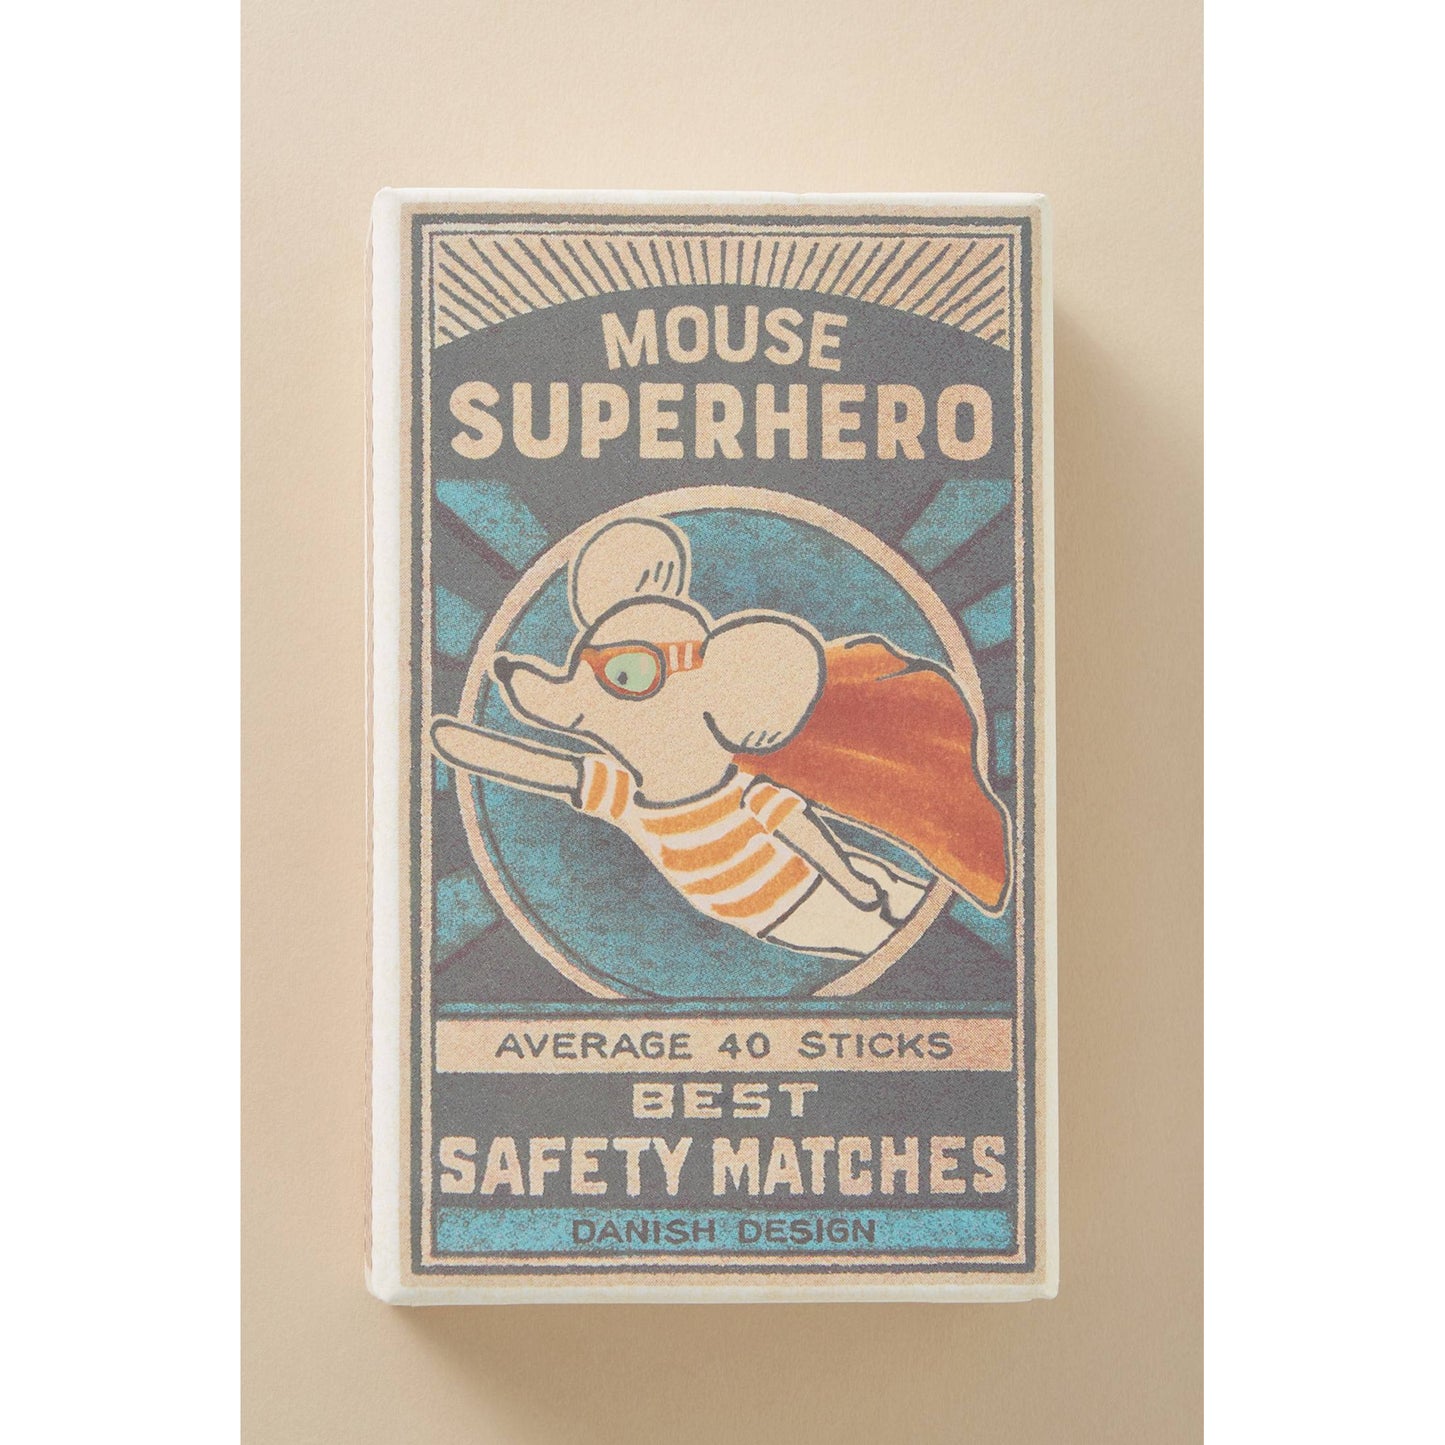 Ratoncito - Super Hero mouse Little brother in a matchbox